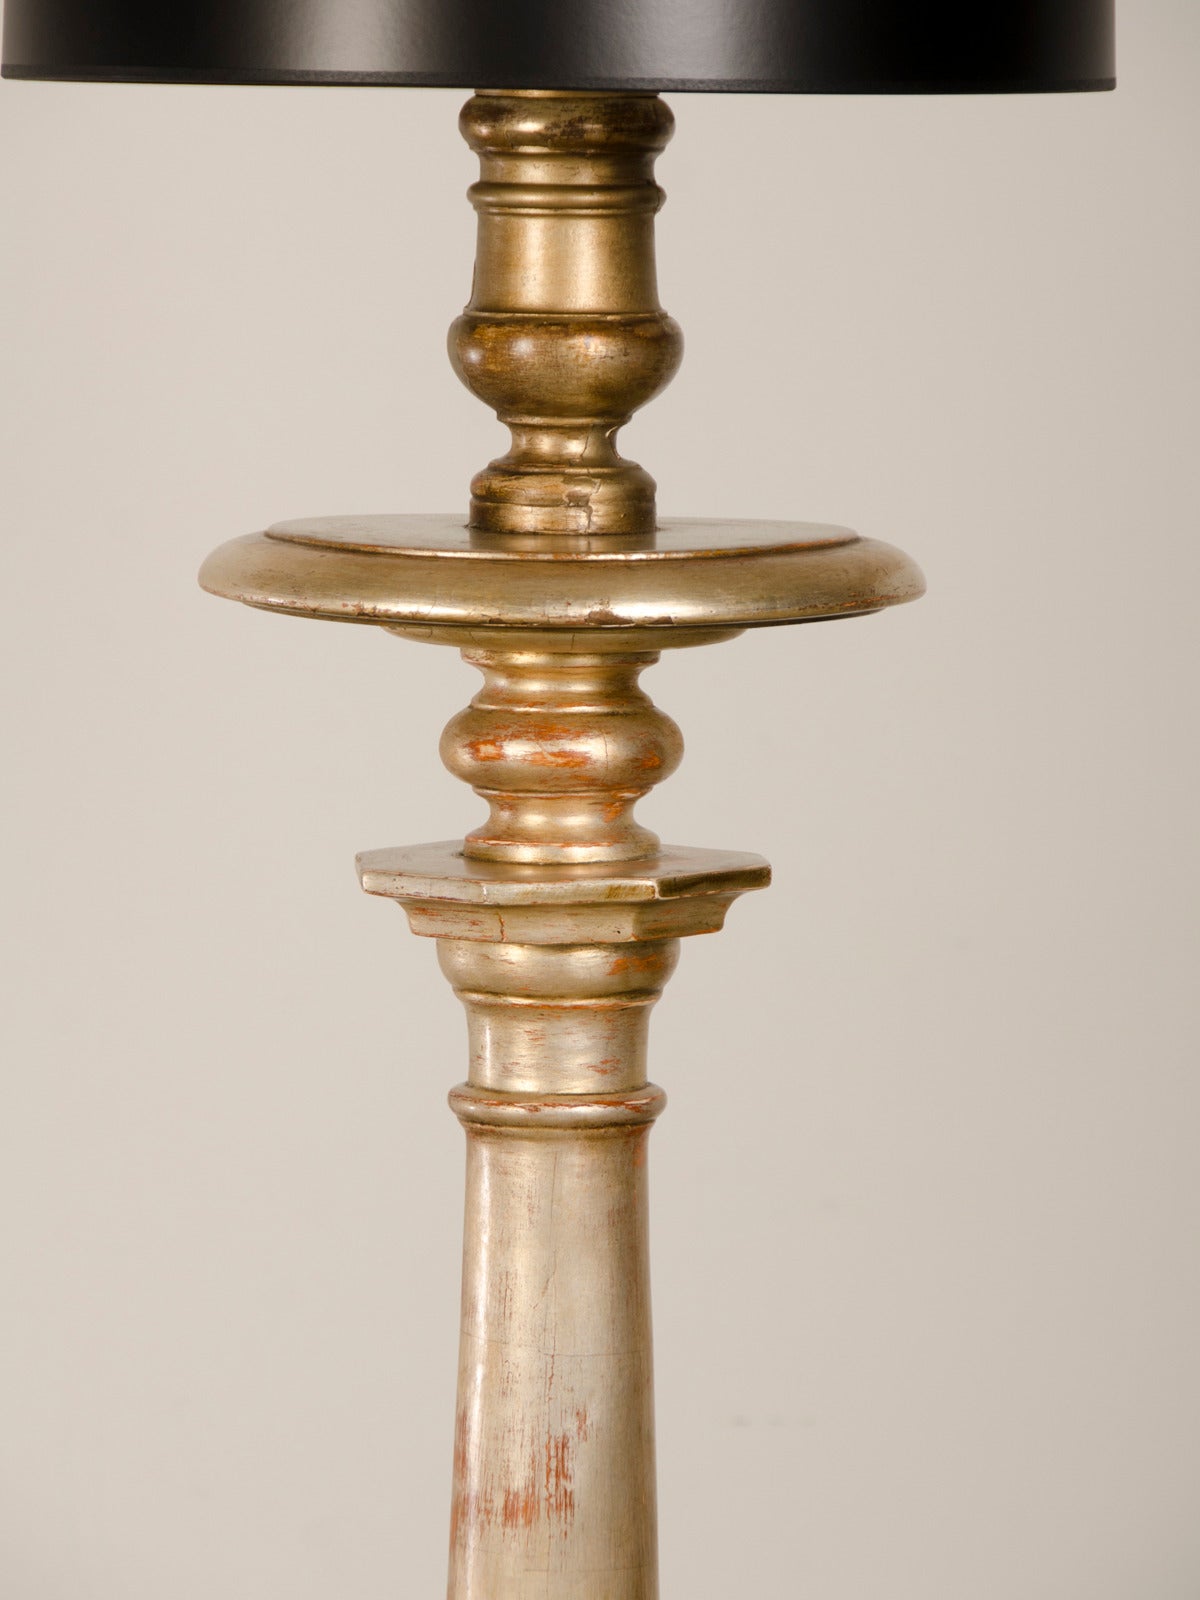 Antique Italian Silver Gilt Candle Stand circa 1890 Converted to a Floor Lamp In Excellent Condition For Sale In Houston, TX